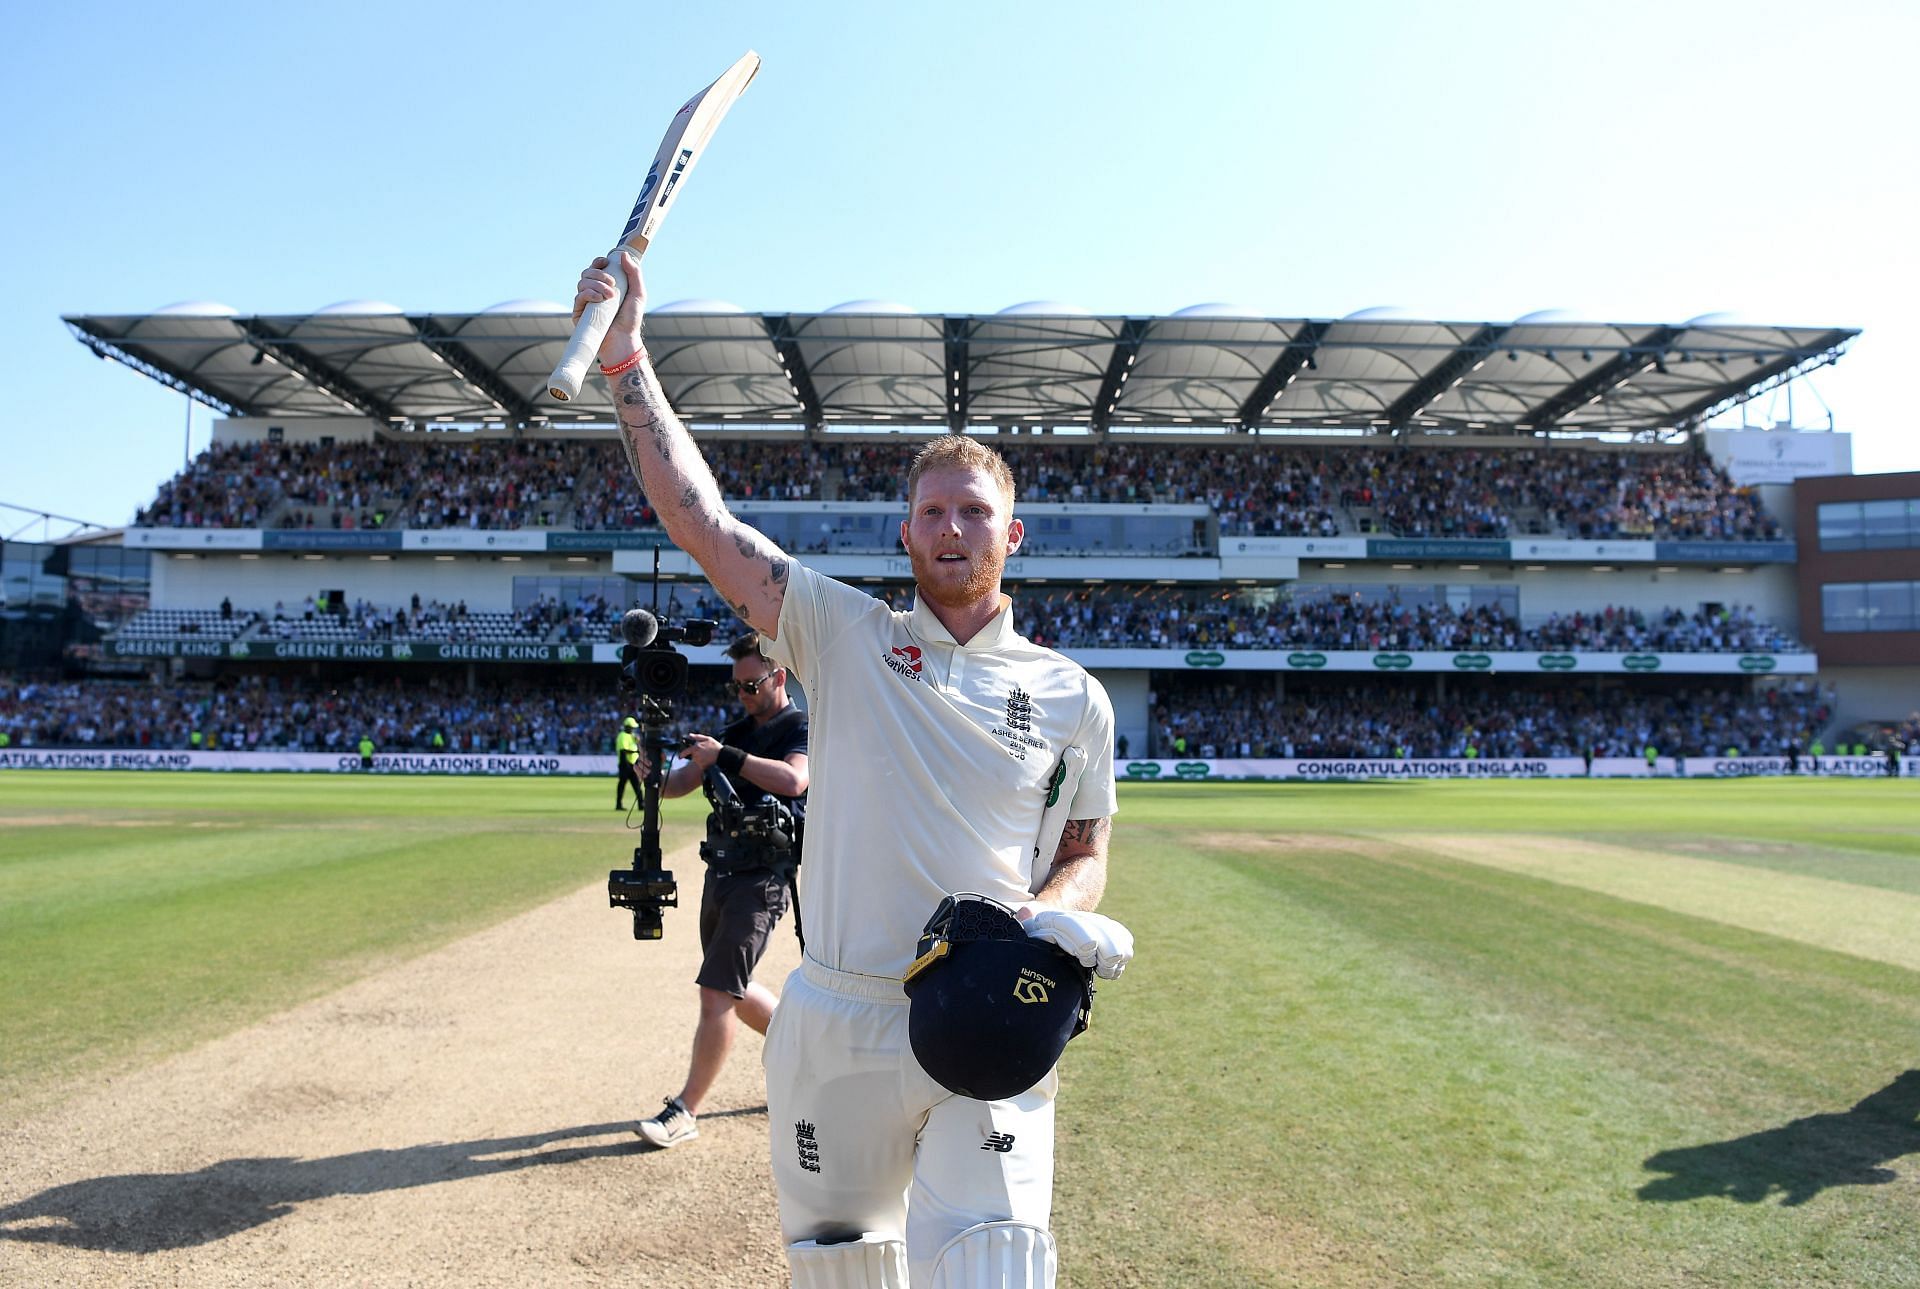 Ben Stokes is one of the most powerful figures in world cricket